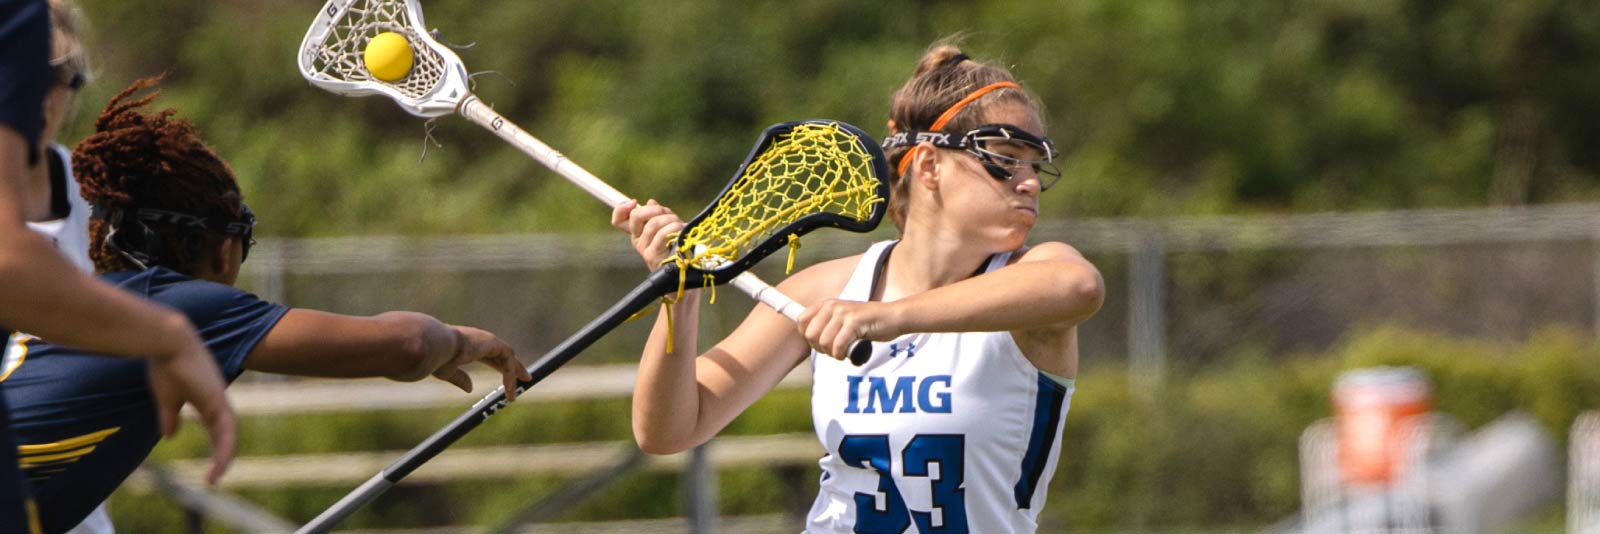 How to make a highlight video for women's lacrosse